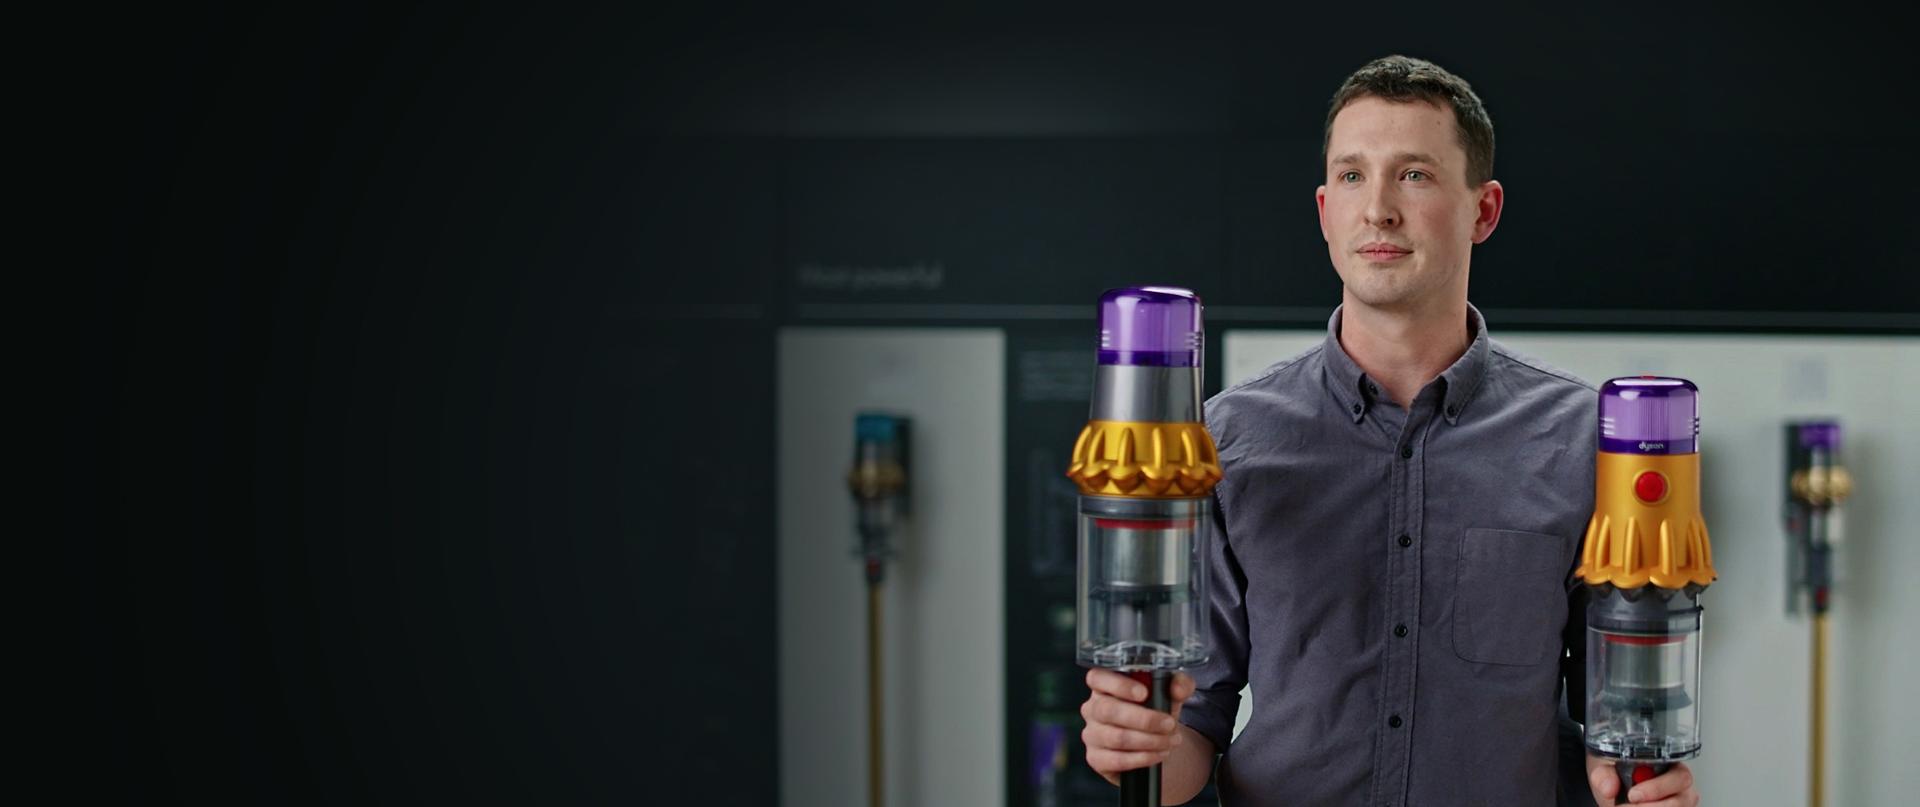 A Dyson Engineer holding Dyson V15 Detect and V12 Detect Slim vacuums